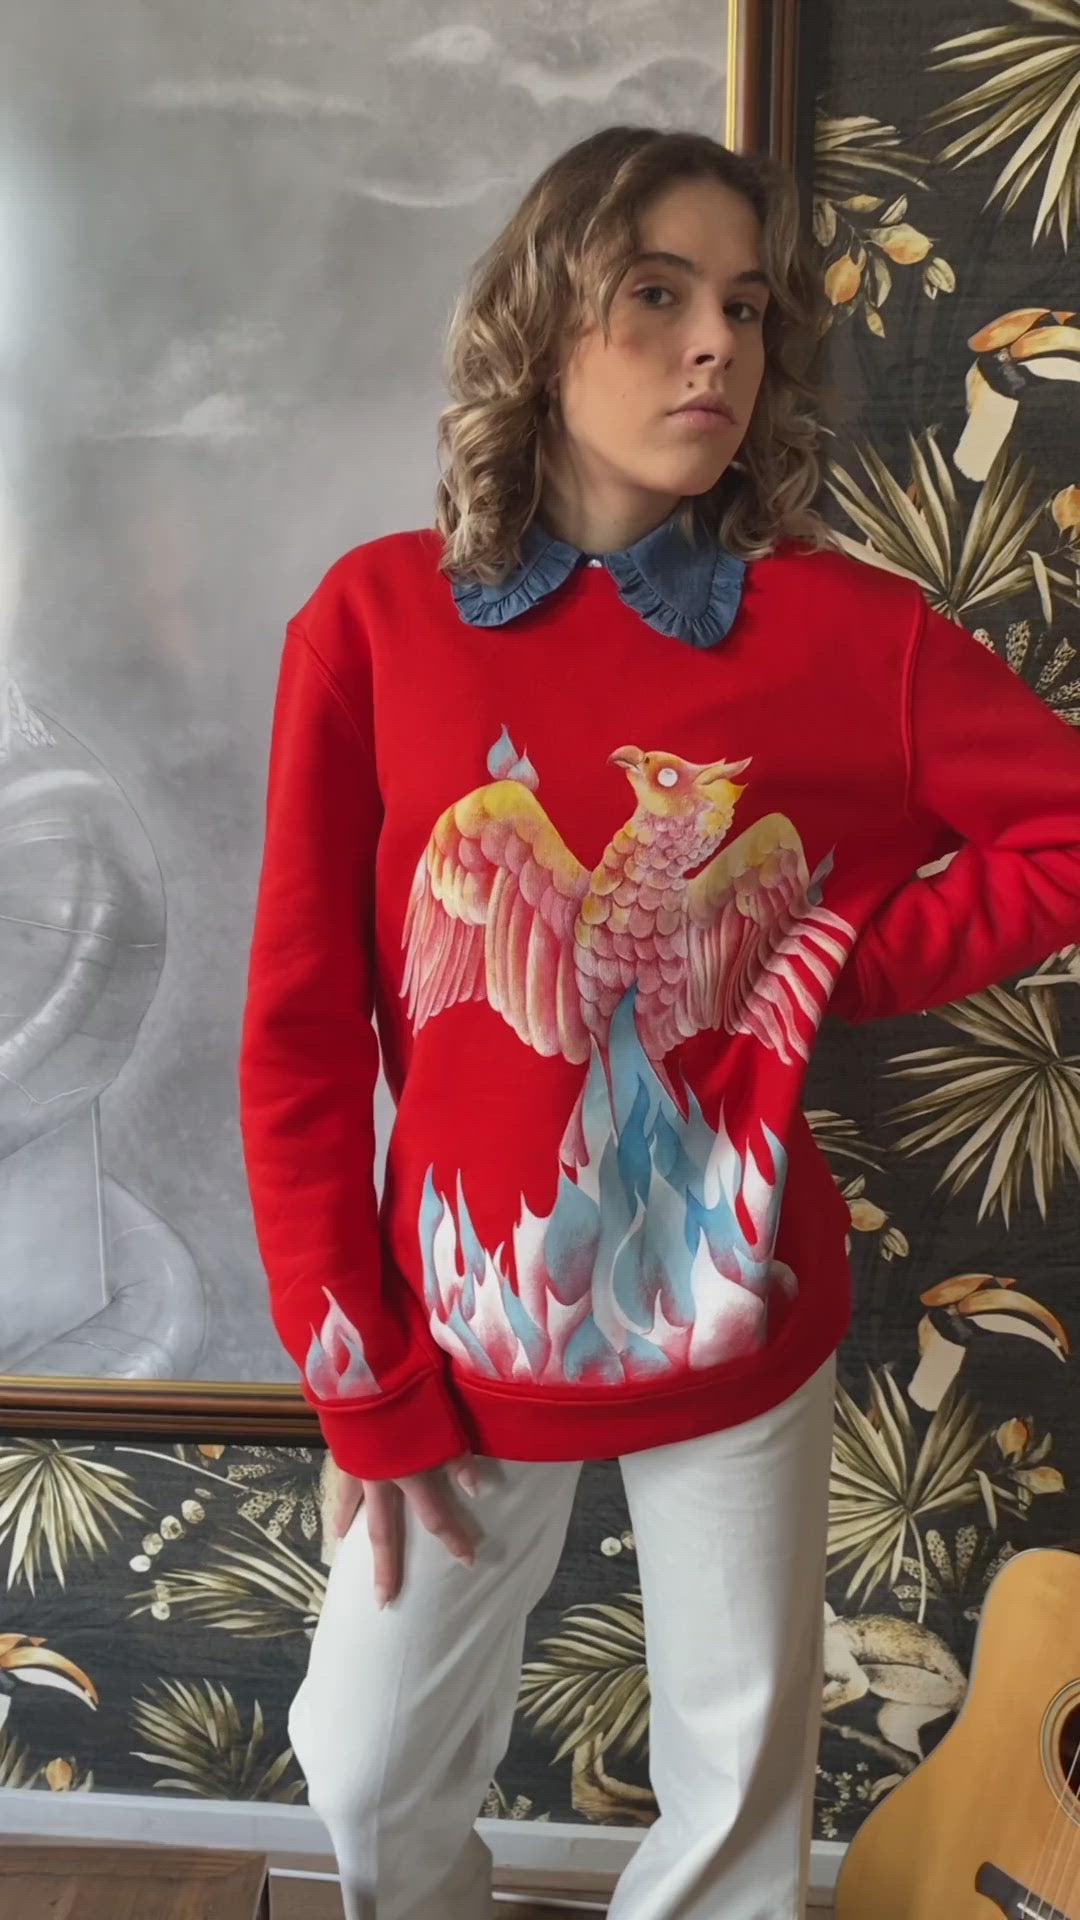 Video of Hand-painted Red Vegan Sweatshirt with an illustration of The Phoenix, painted with non-toxic paints by Atelier Astrid & Antoinette